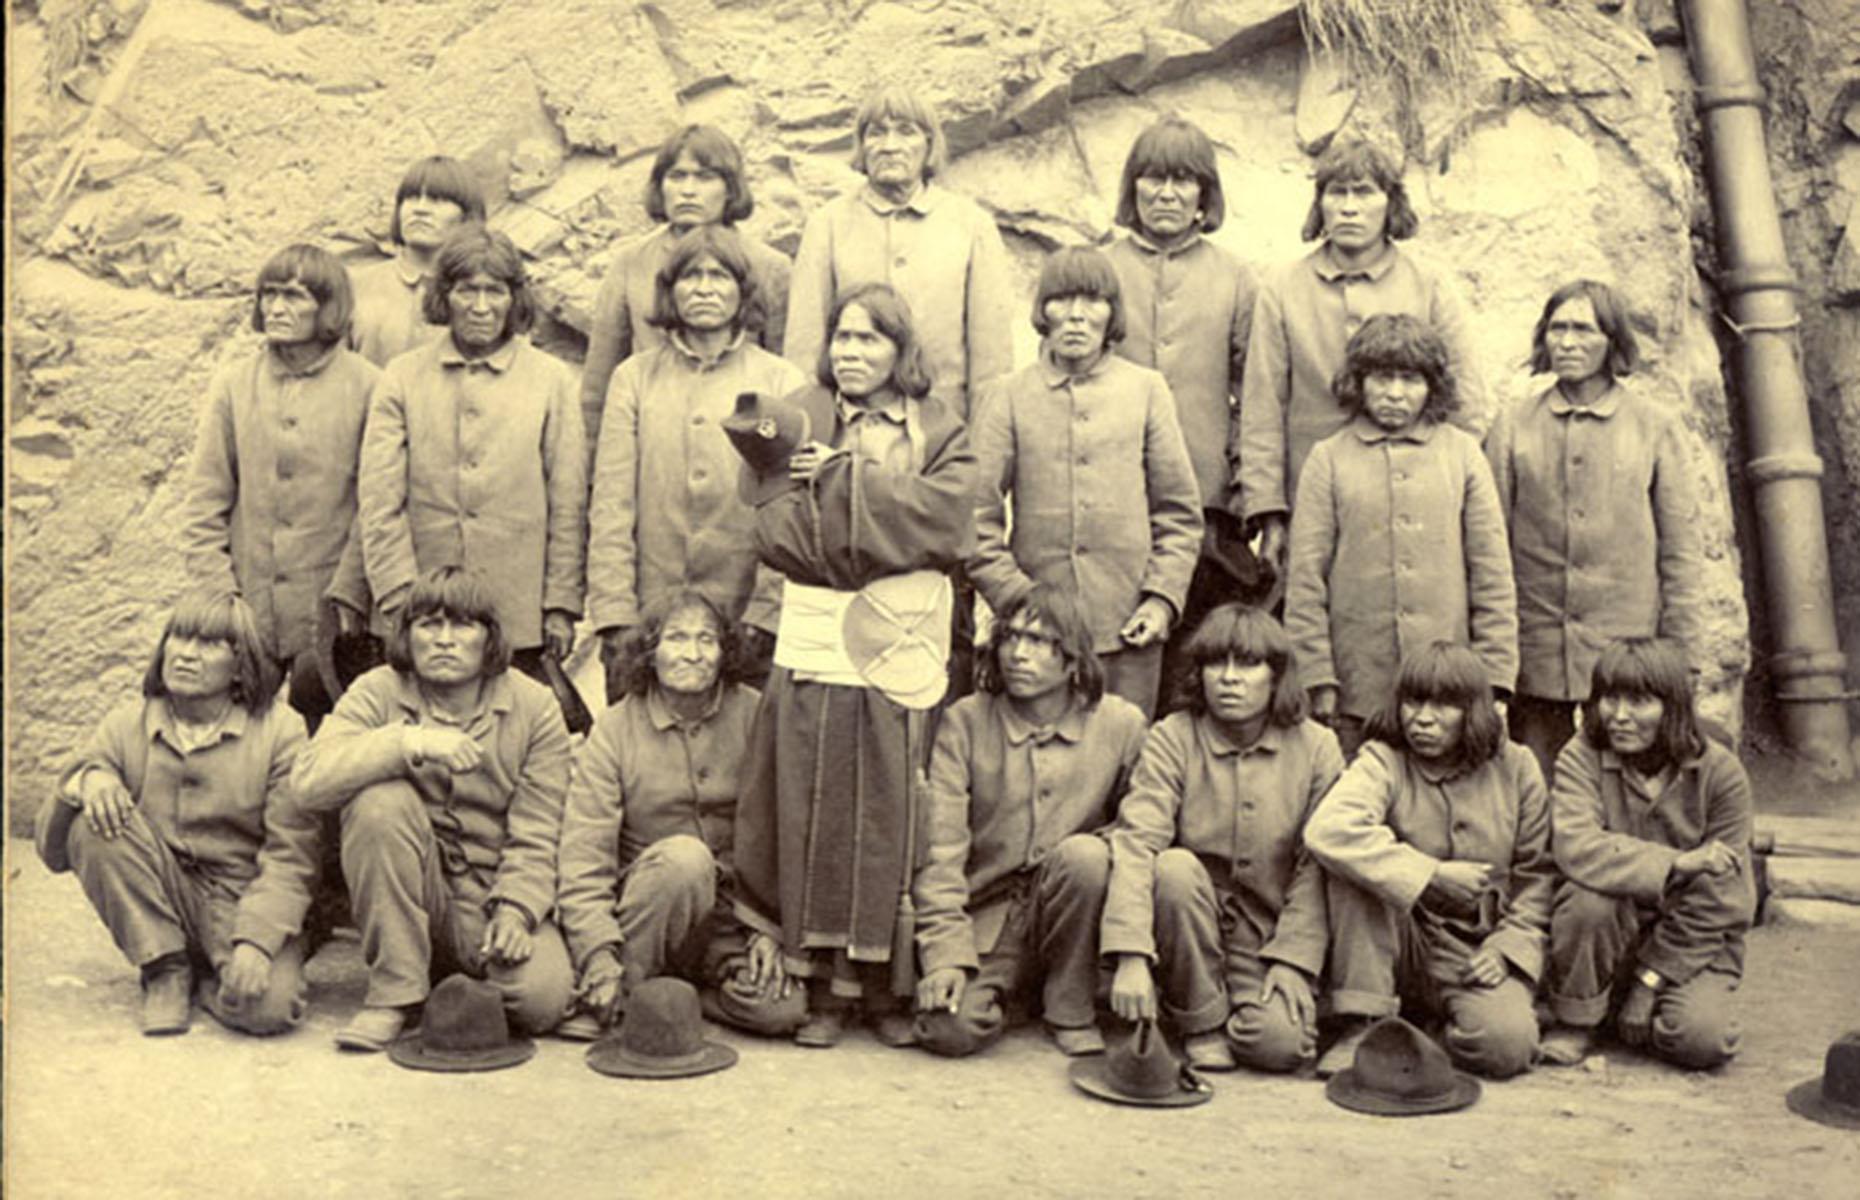 <p>Perhaps the best-known of the fort's prisoners during these early years were the Hopi 19. This group of 19 men from the Indigenous Hopi tribe – who lived in modern-day Arizona – were incarcerated in 1895 after they resisted the government's plans to send their children to boarding schools designed to assimilate them into Euro-American culture. At these schools, students were given new names and kept away from their parents, while Indigenous languages and ceremonies were forbidden and ignored.</p>